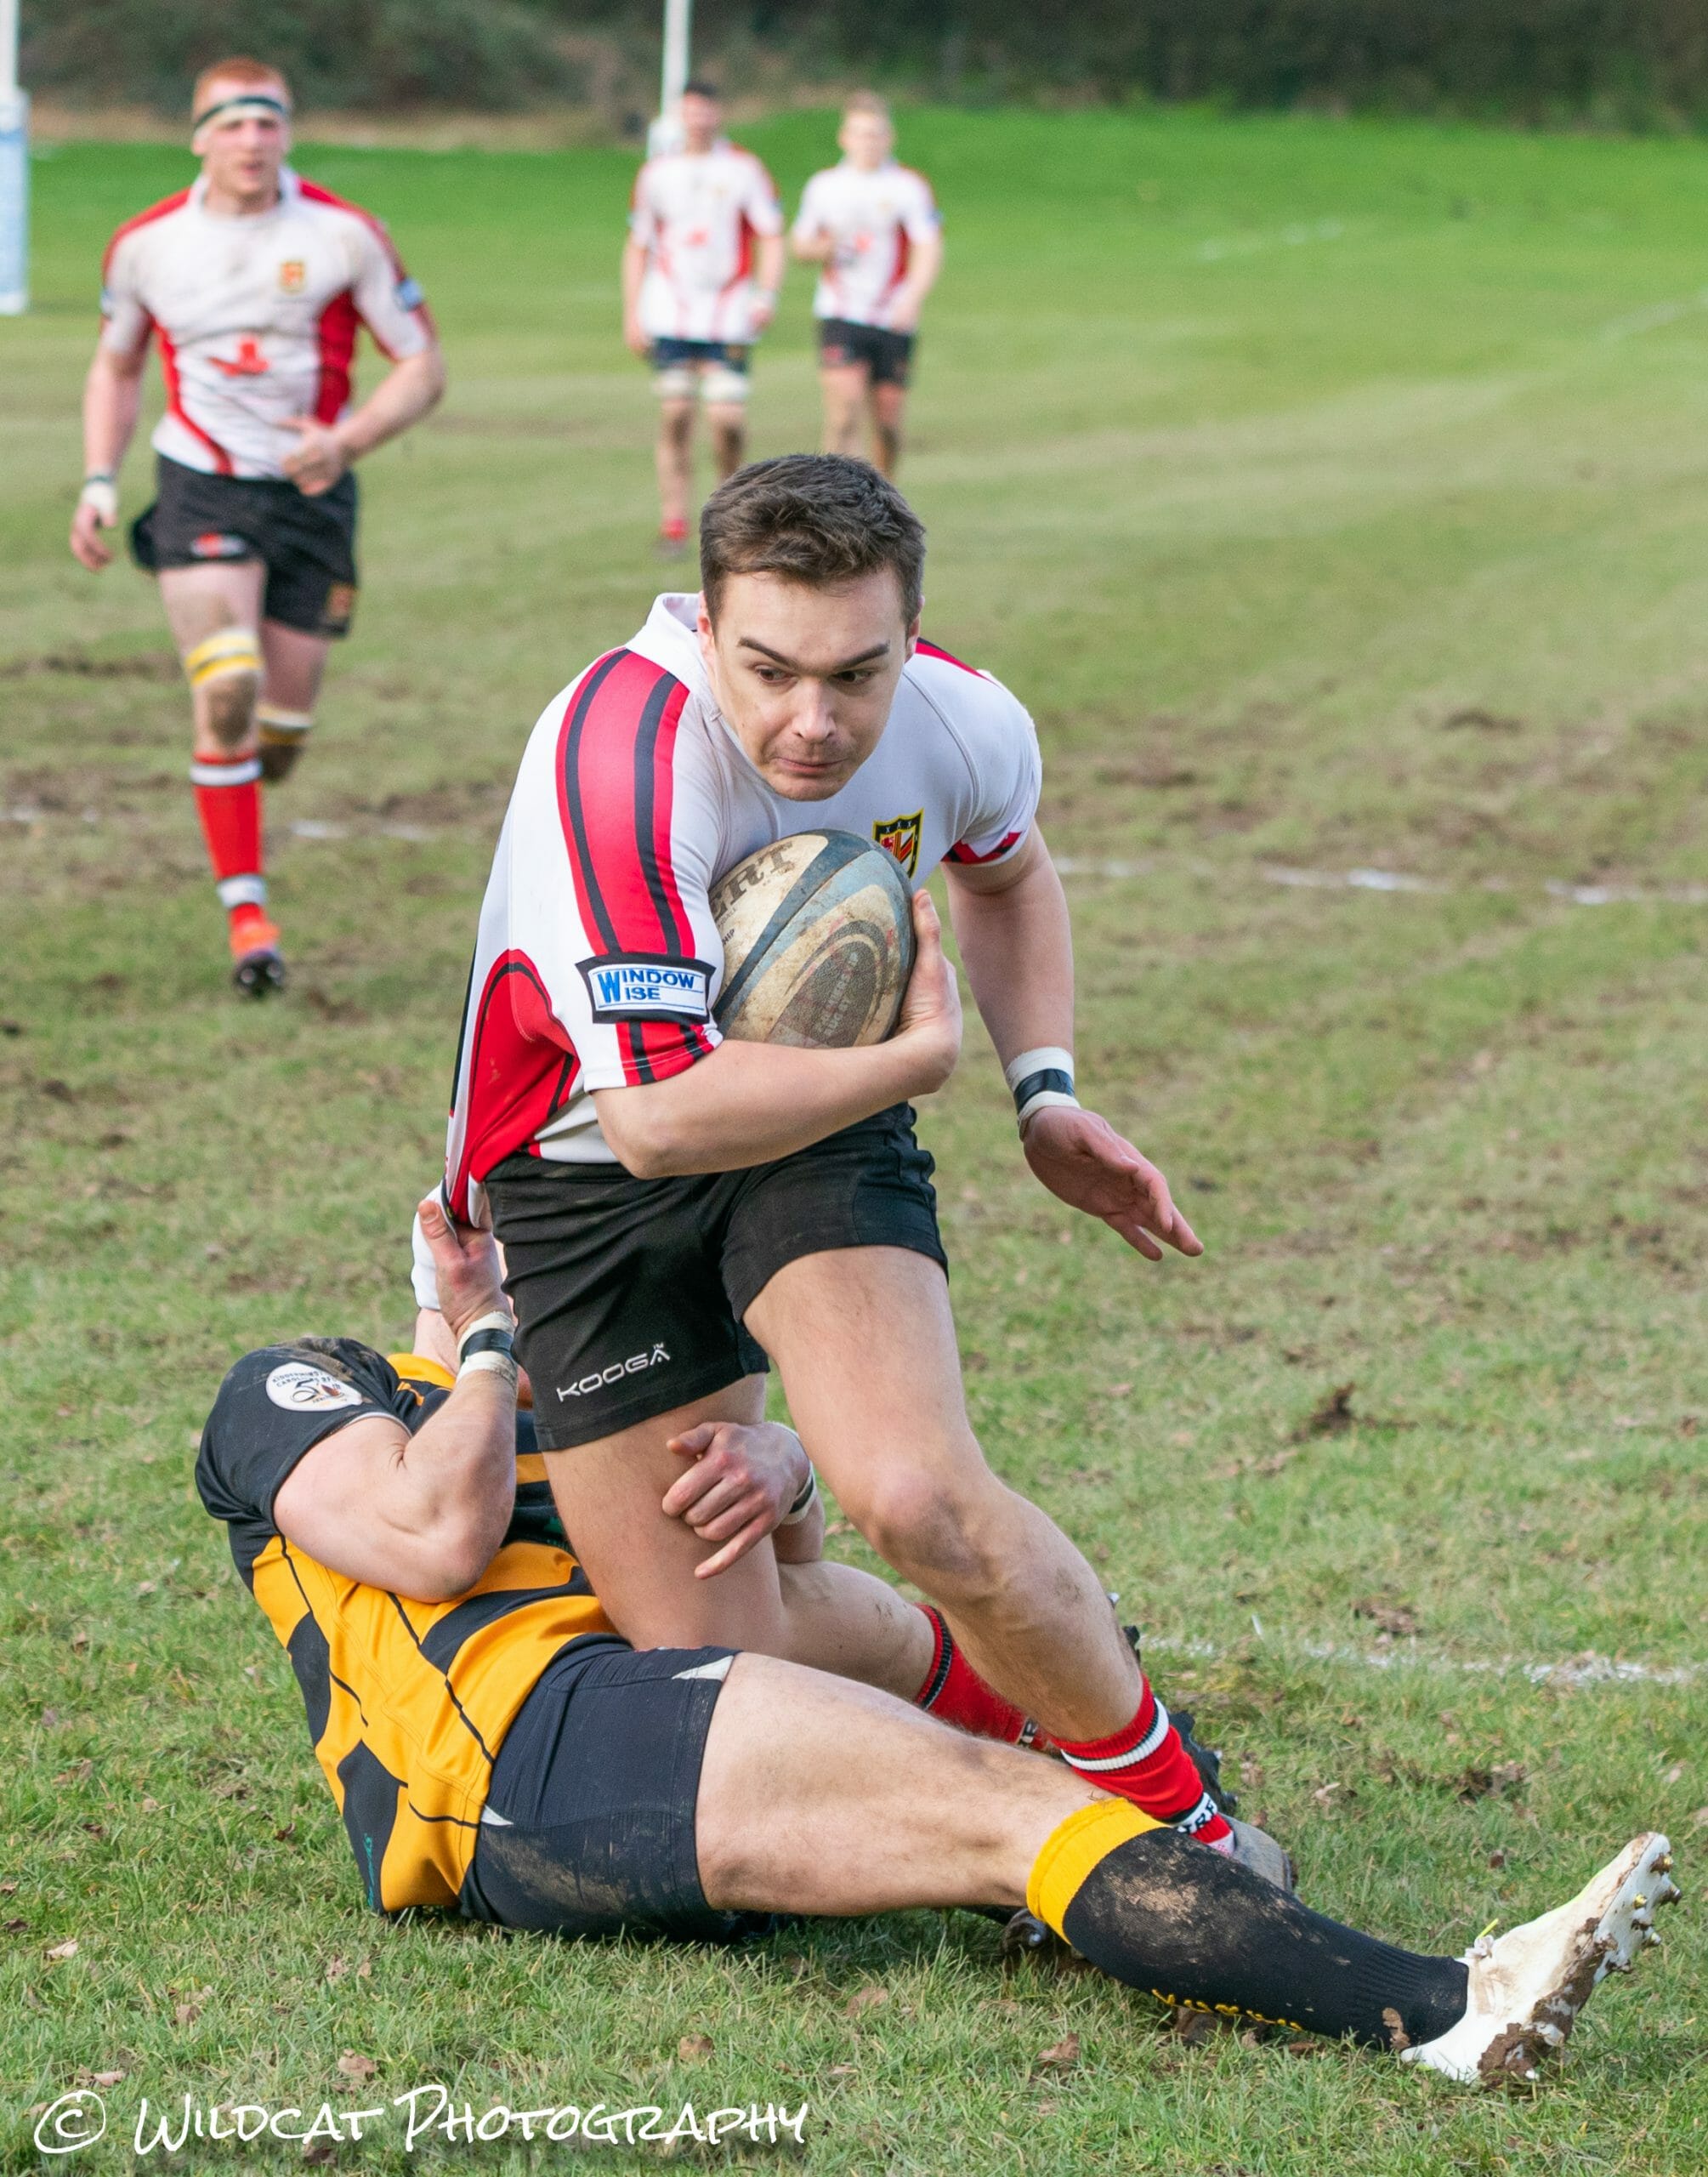 RUGBY | Hereford return to winning ways with convincing victory